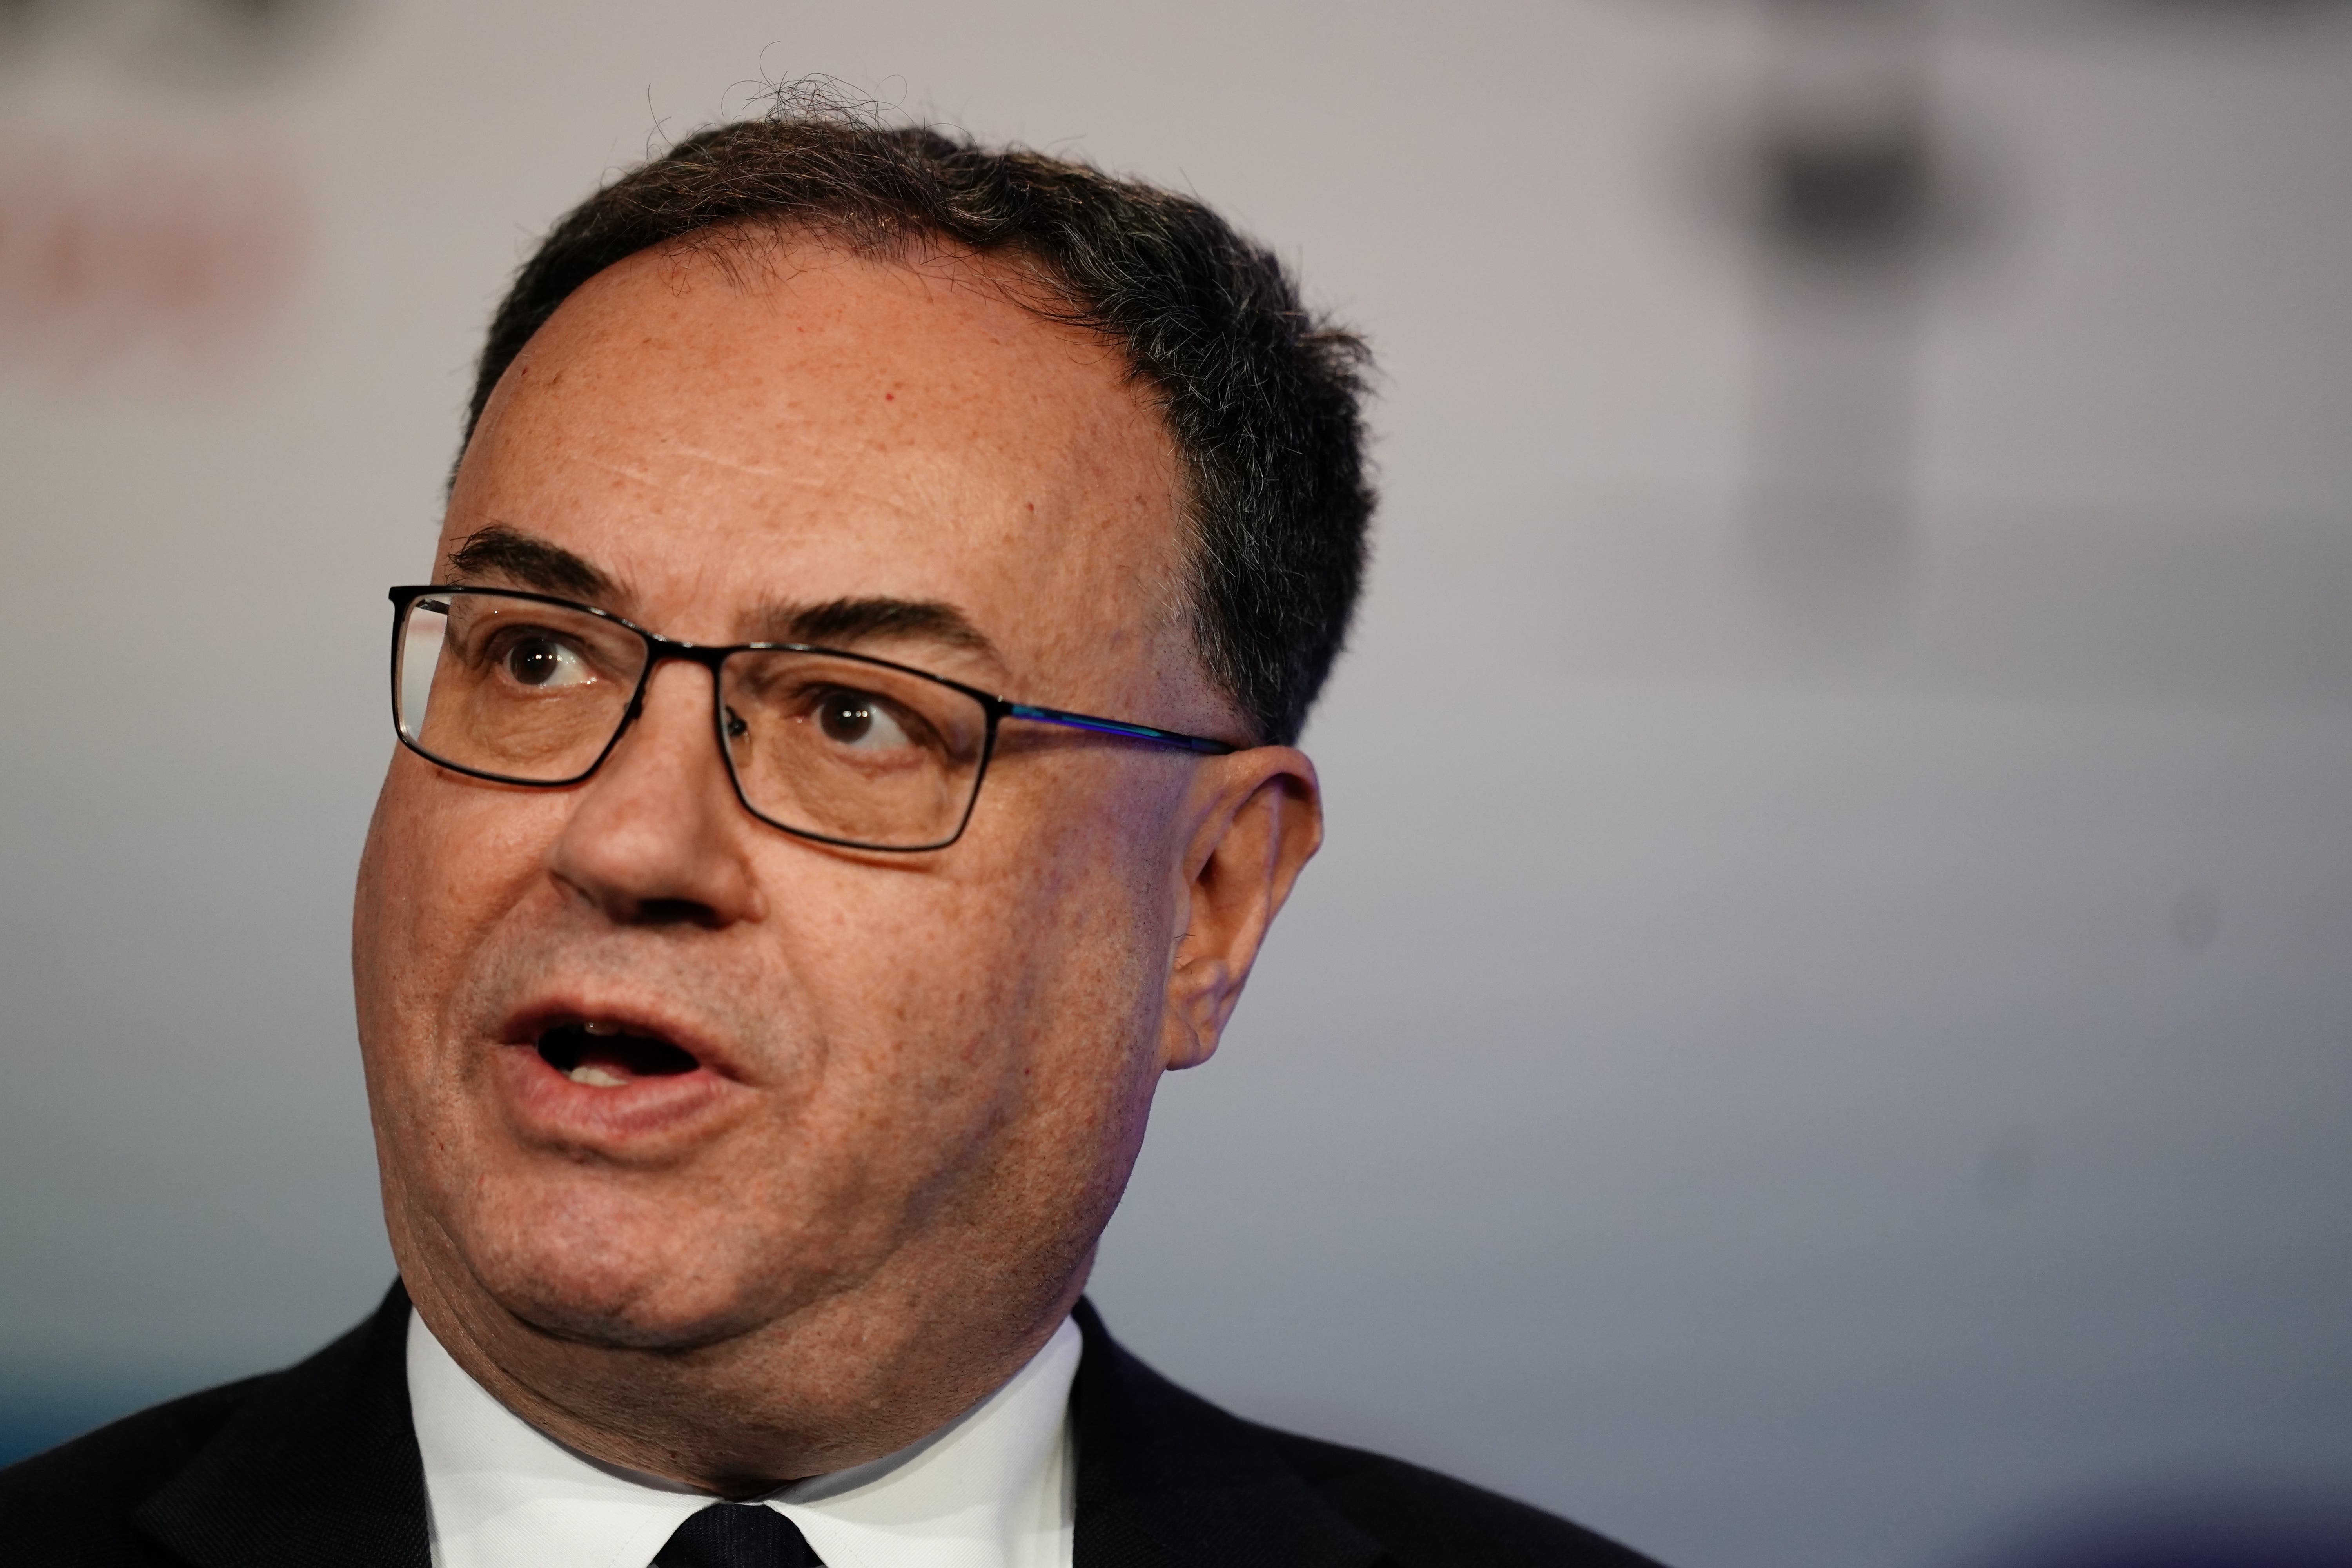 Bank of England governor Andrew Bailey is under pressure to keep rates as low as possible